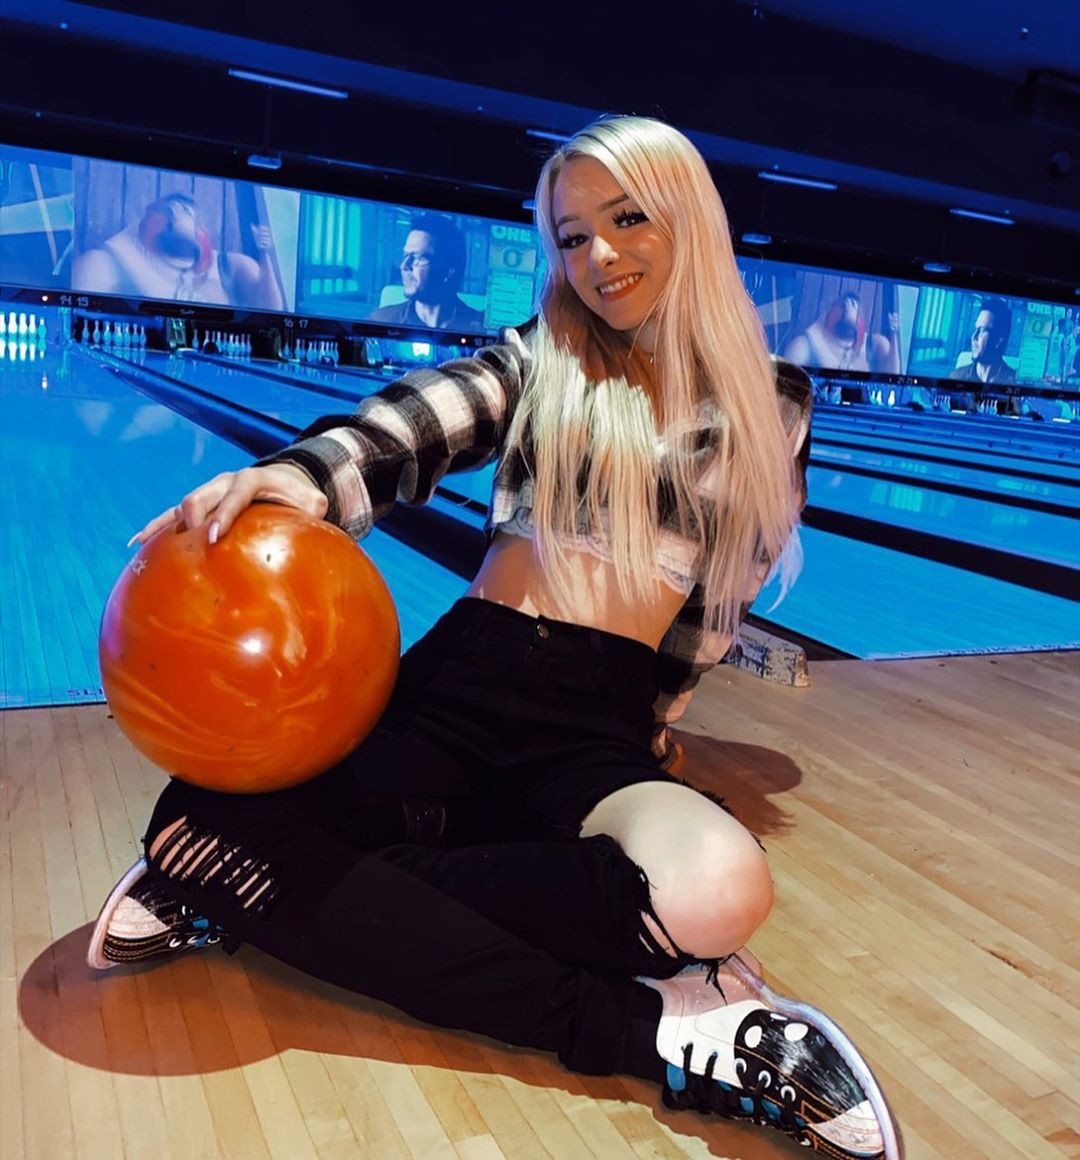 Zoe Laverne hot legs, individual sports, bowling equipment: Sexy Outfits,  Zoe Laverne TikTok  